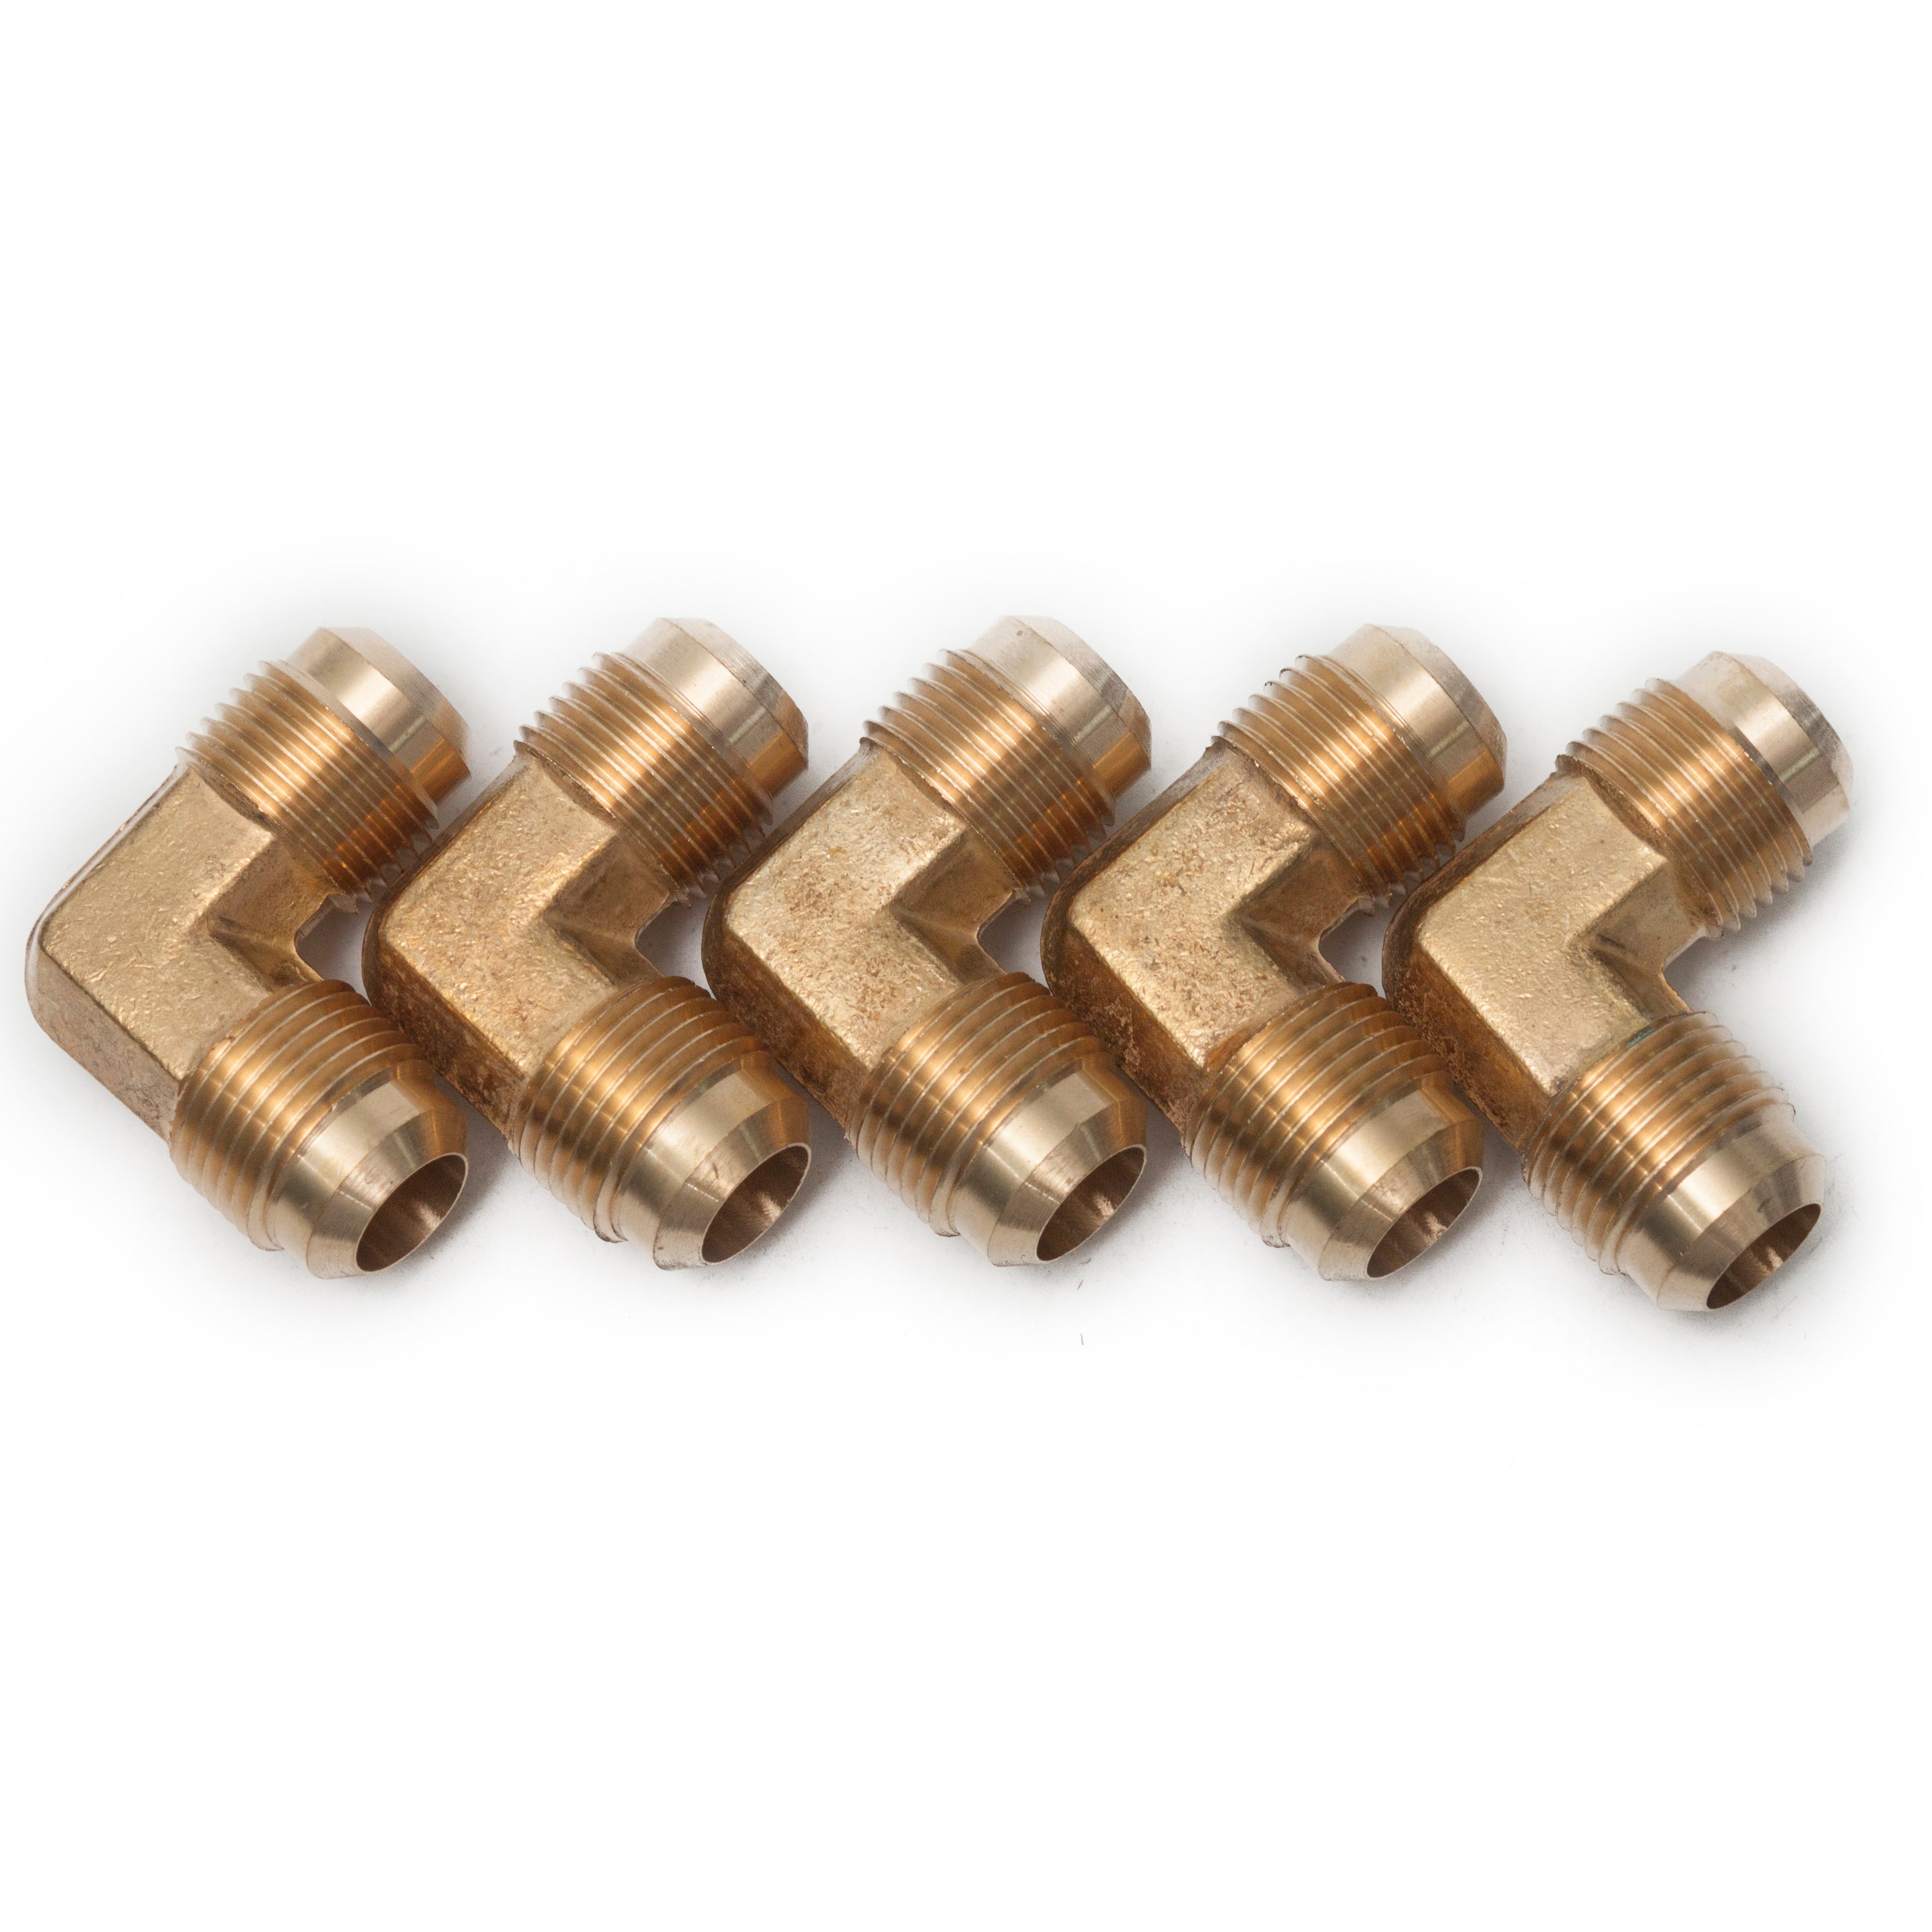 Lead Free Brass Compression Fittings - Union Elbows - 3/8 T O.D.